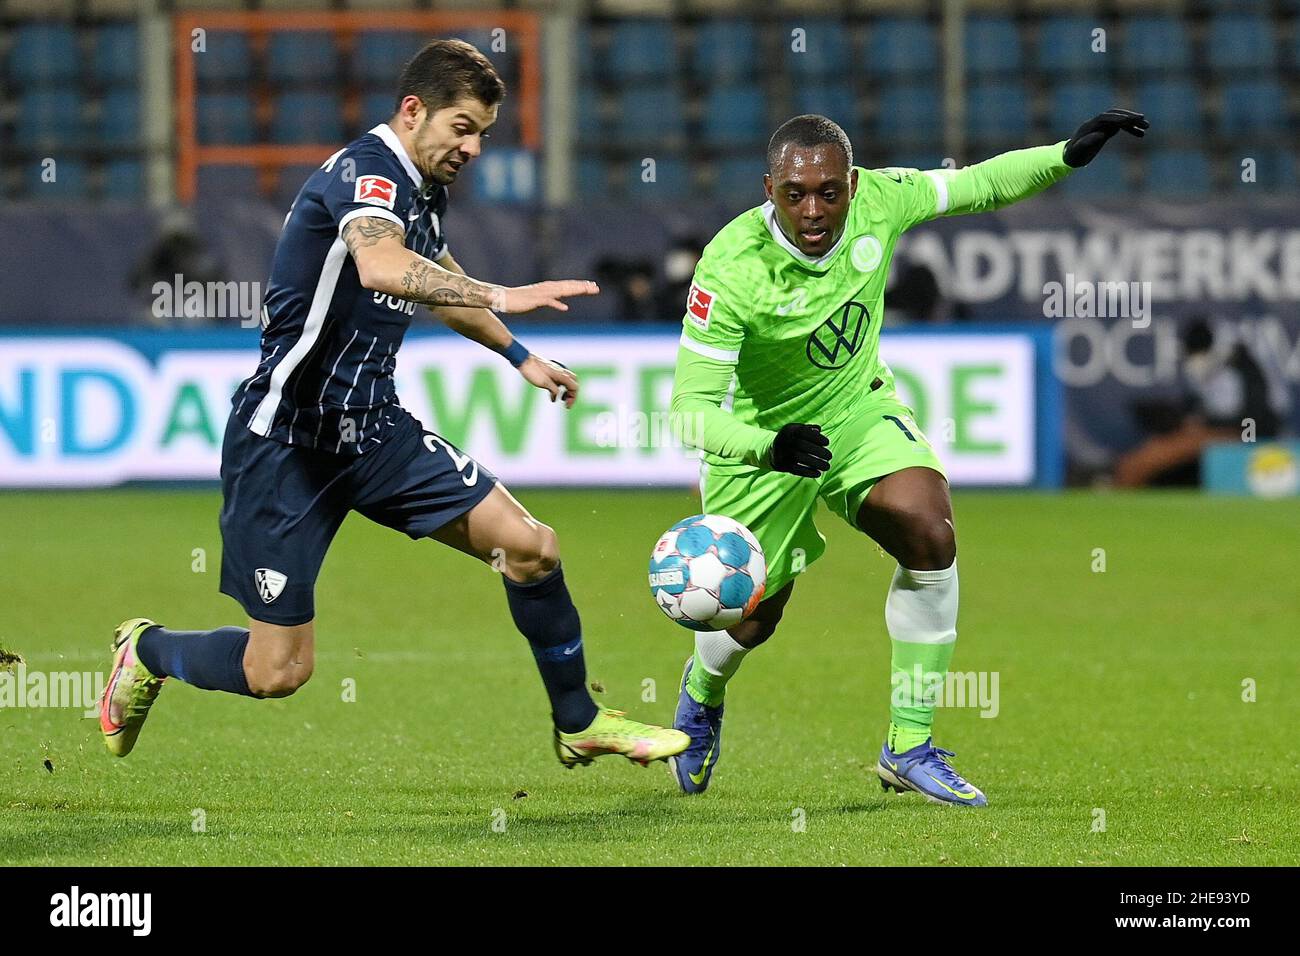 Bochum, Germany. 9th Jan, 2022. Jerome Roussillon (R) of Wolfsburg vies with Christian Gamboa of Bochum during their German first division Bundesliga football match in Bochum, Germany, Jan. 9, 2022. Credit: Ulrich Hufnagel/Xinhua/Alamy Live News Stock Photo